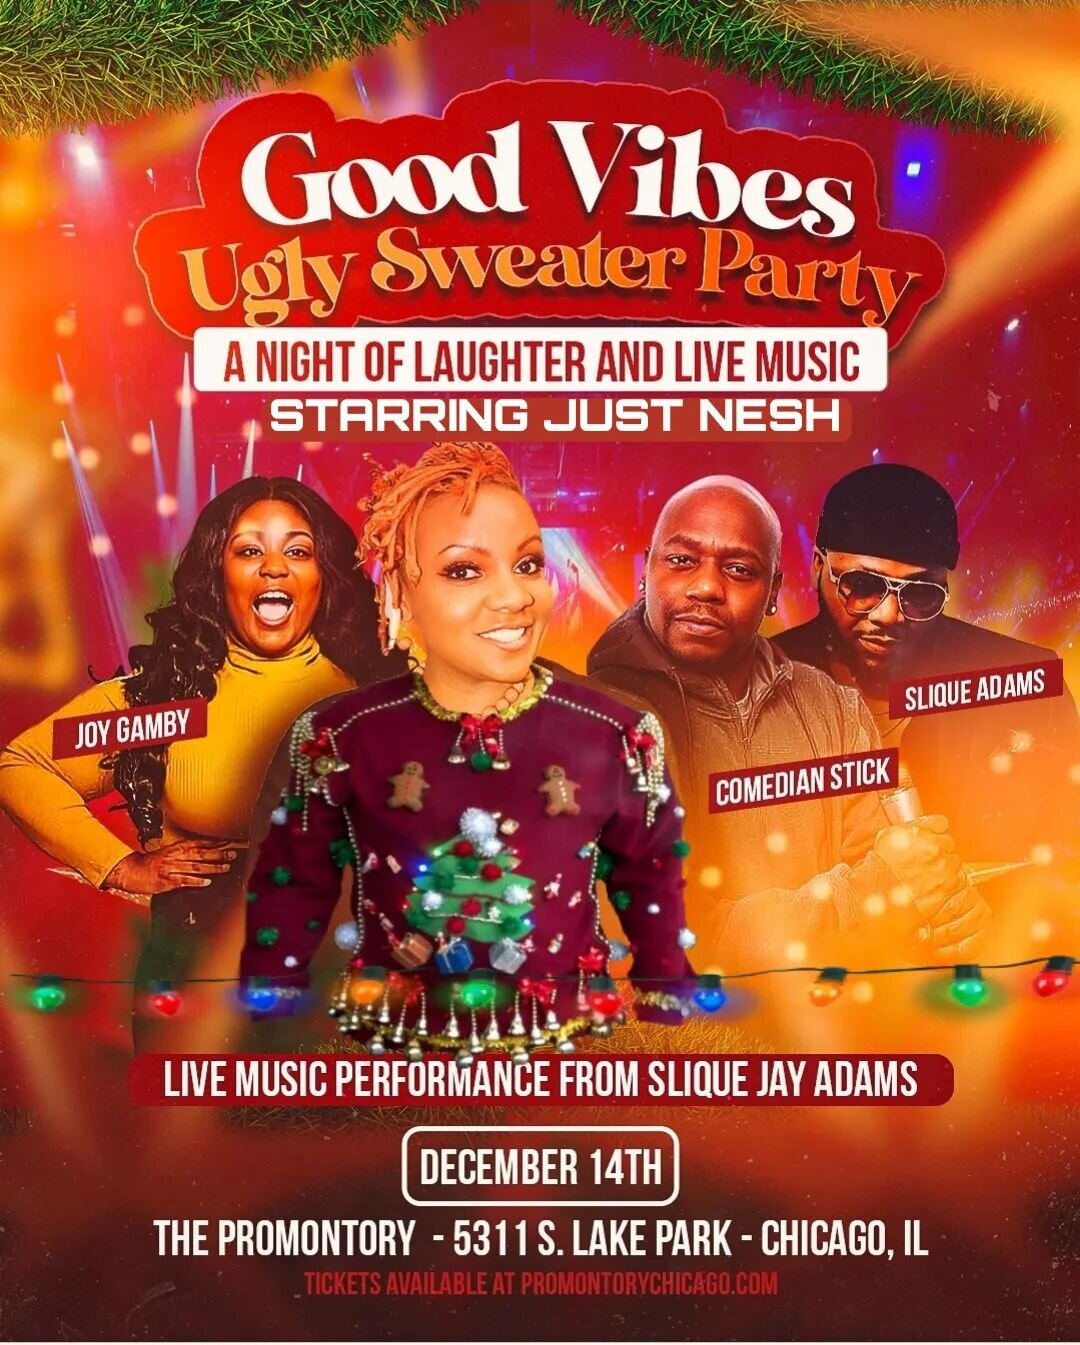 @justnesh #GOODVIBESONLY Ugly Sweater Comedy Jam December 14th! Featuring @comedianstick, @joygamby and @sliquejayadams